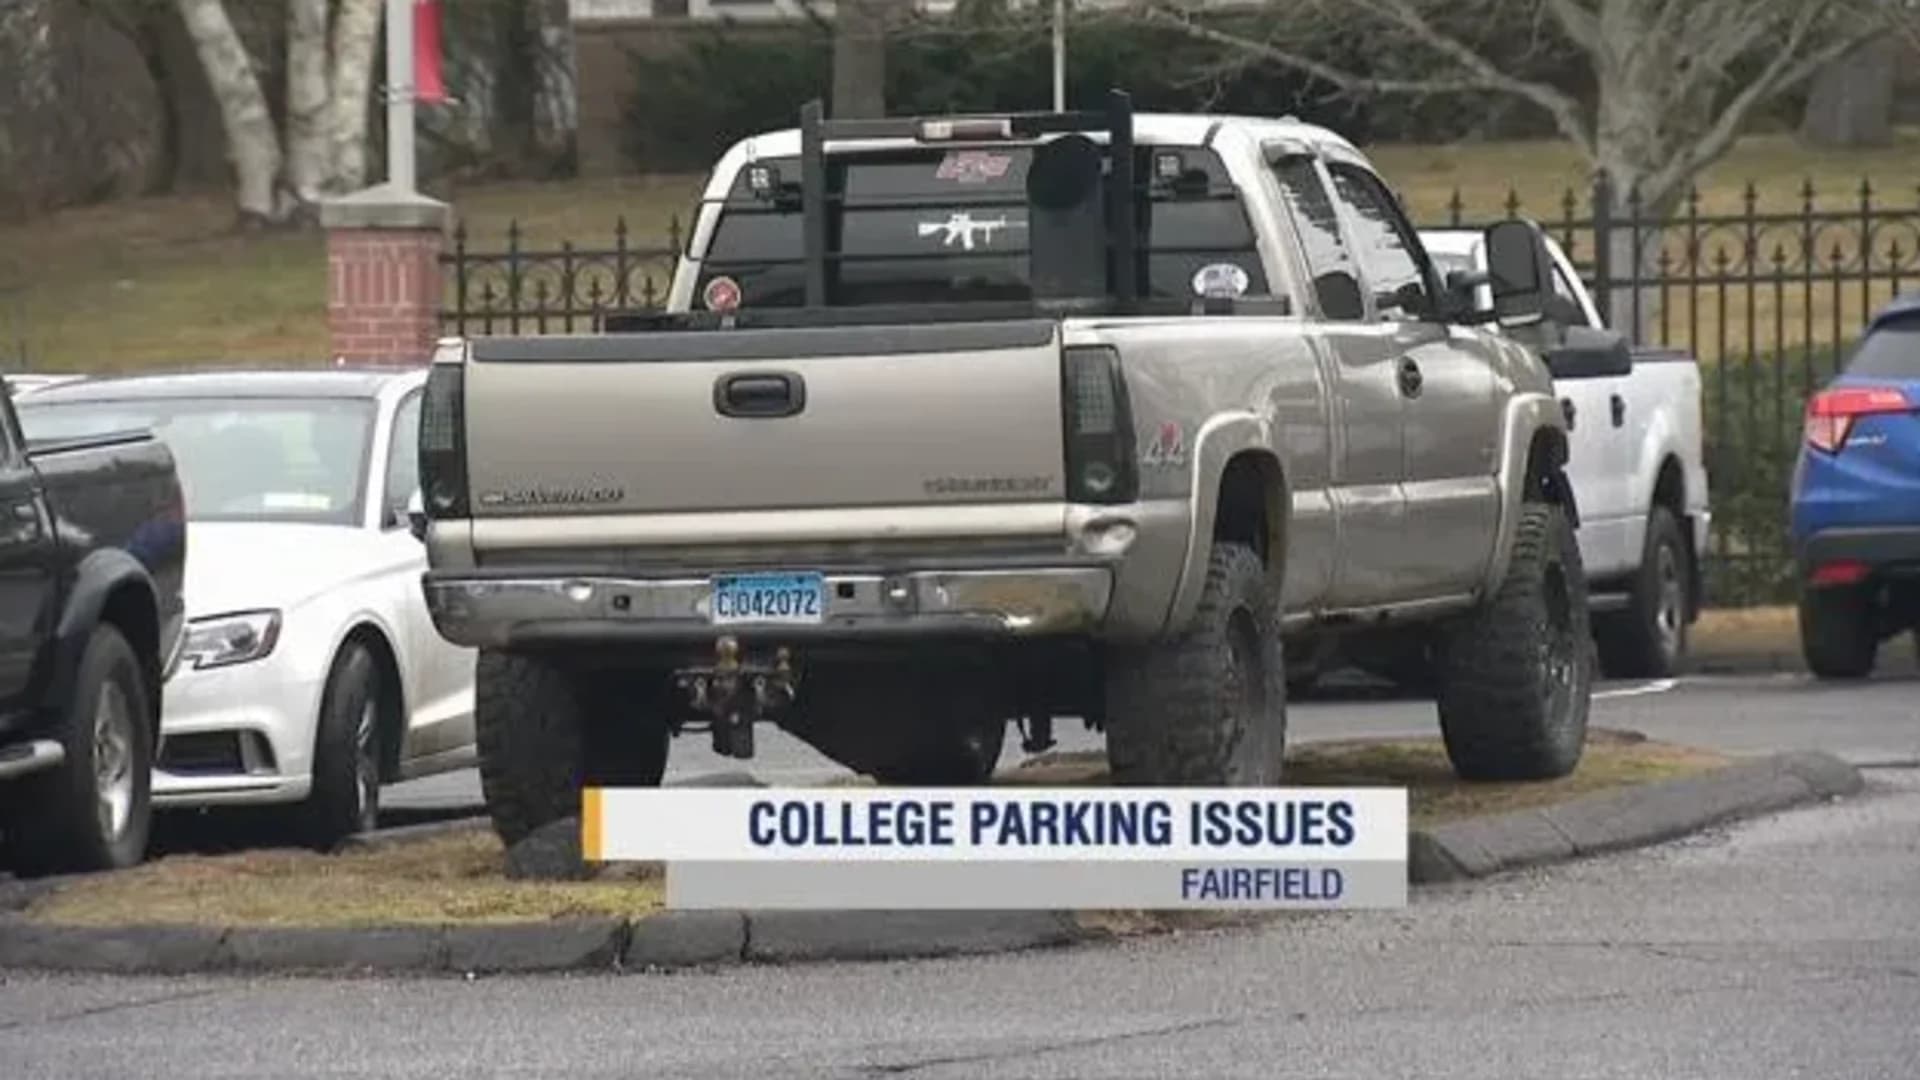 'Sidewalks are now blocked with vehicles:' Illegal parking a major problem at SHU